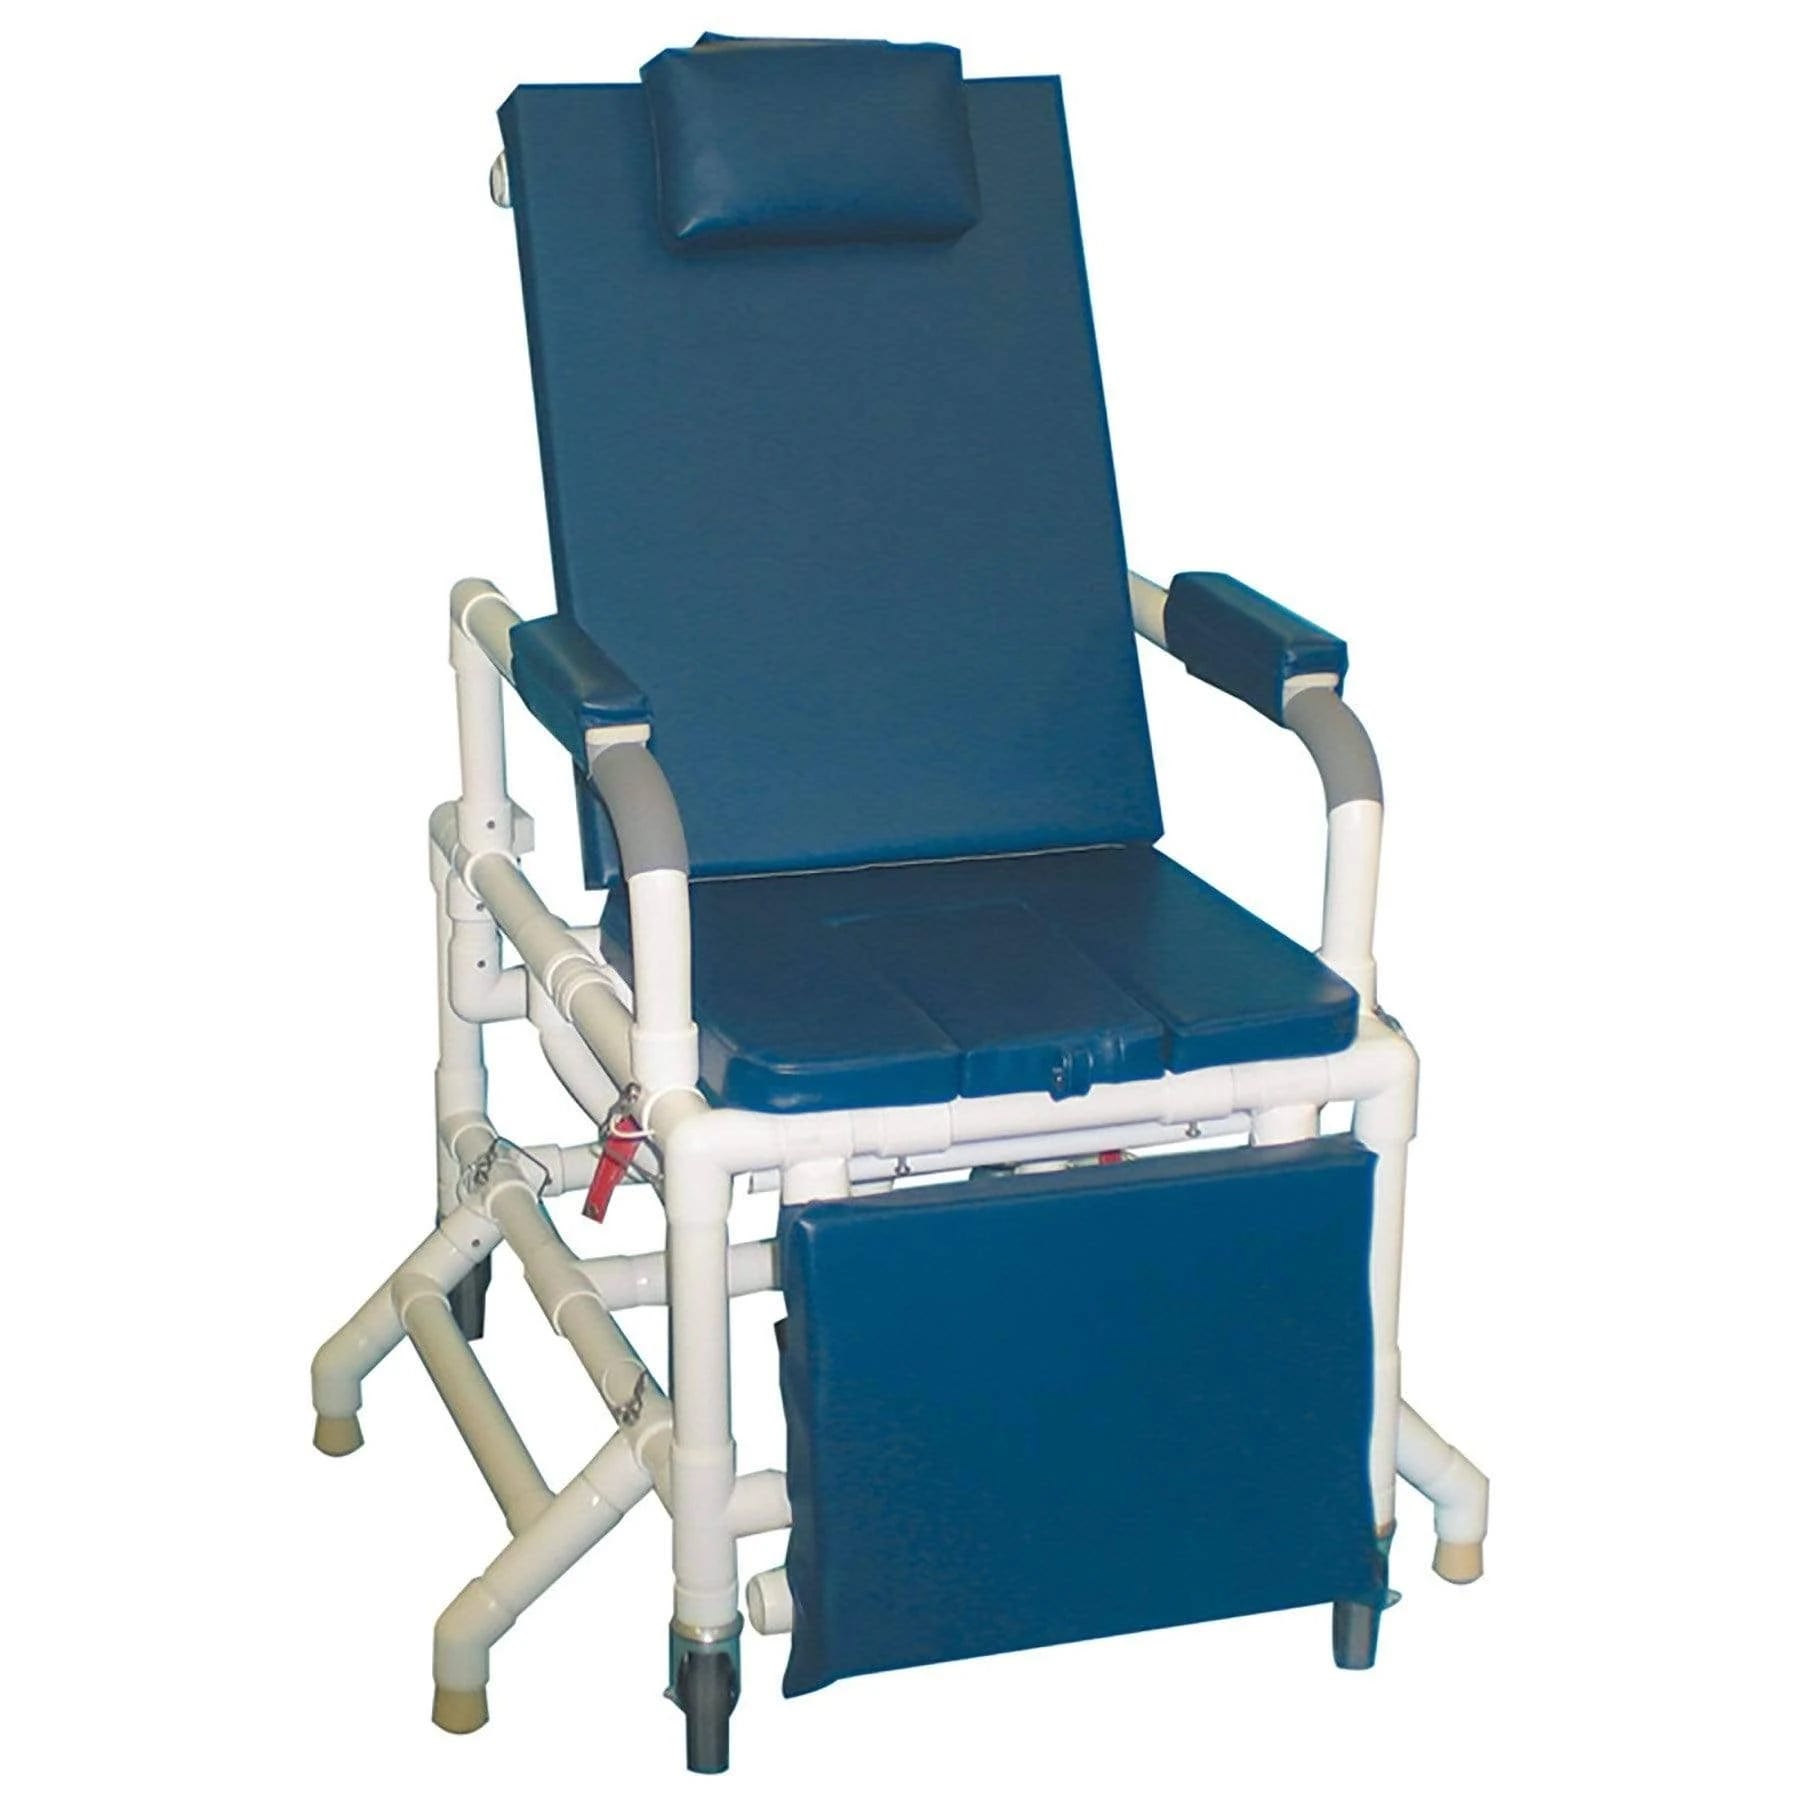 MJM Detachable Geri Chair with Multi-Position Seat and Heavy-Duty Casters | Image